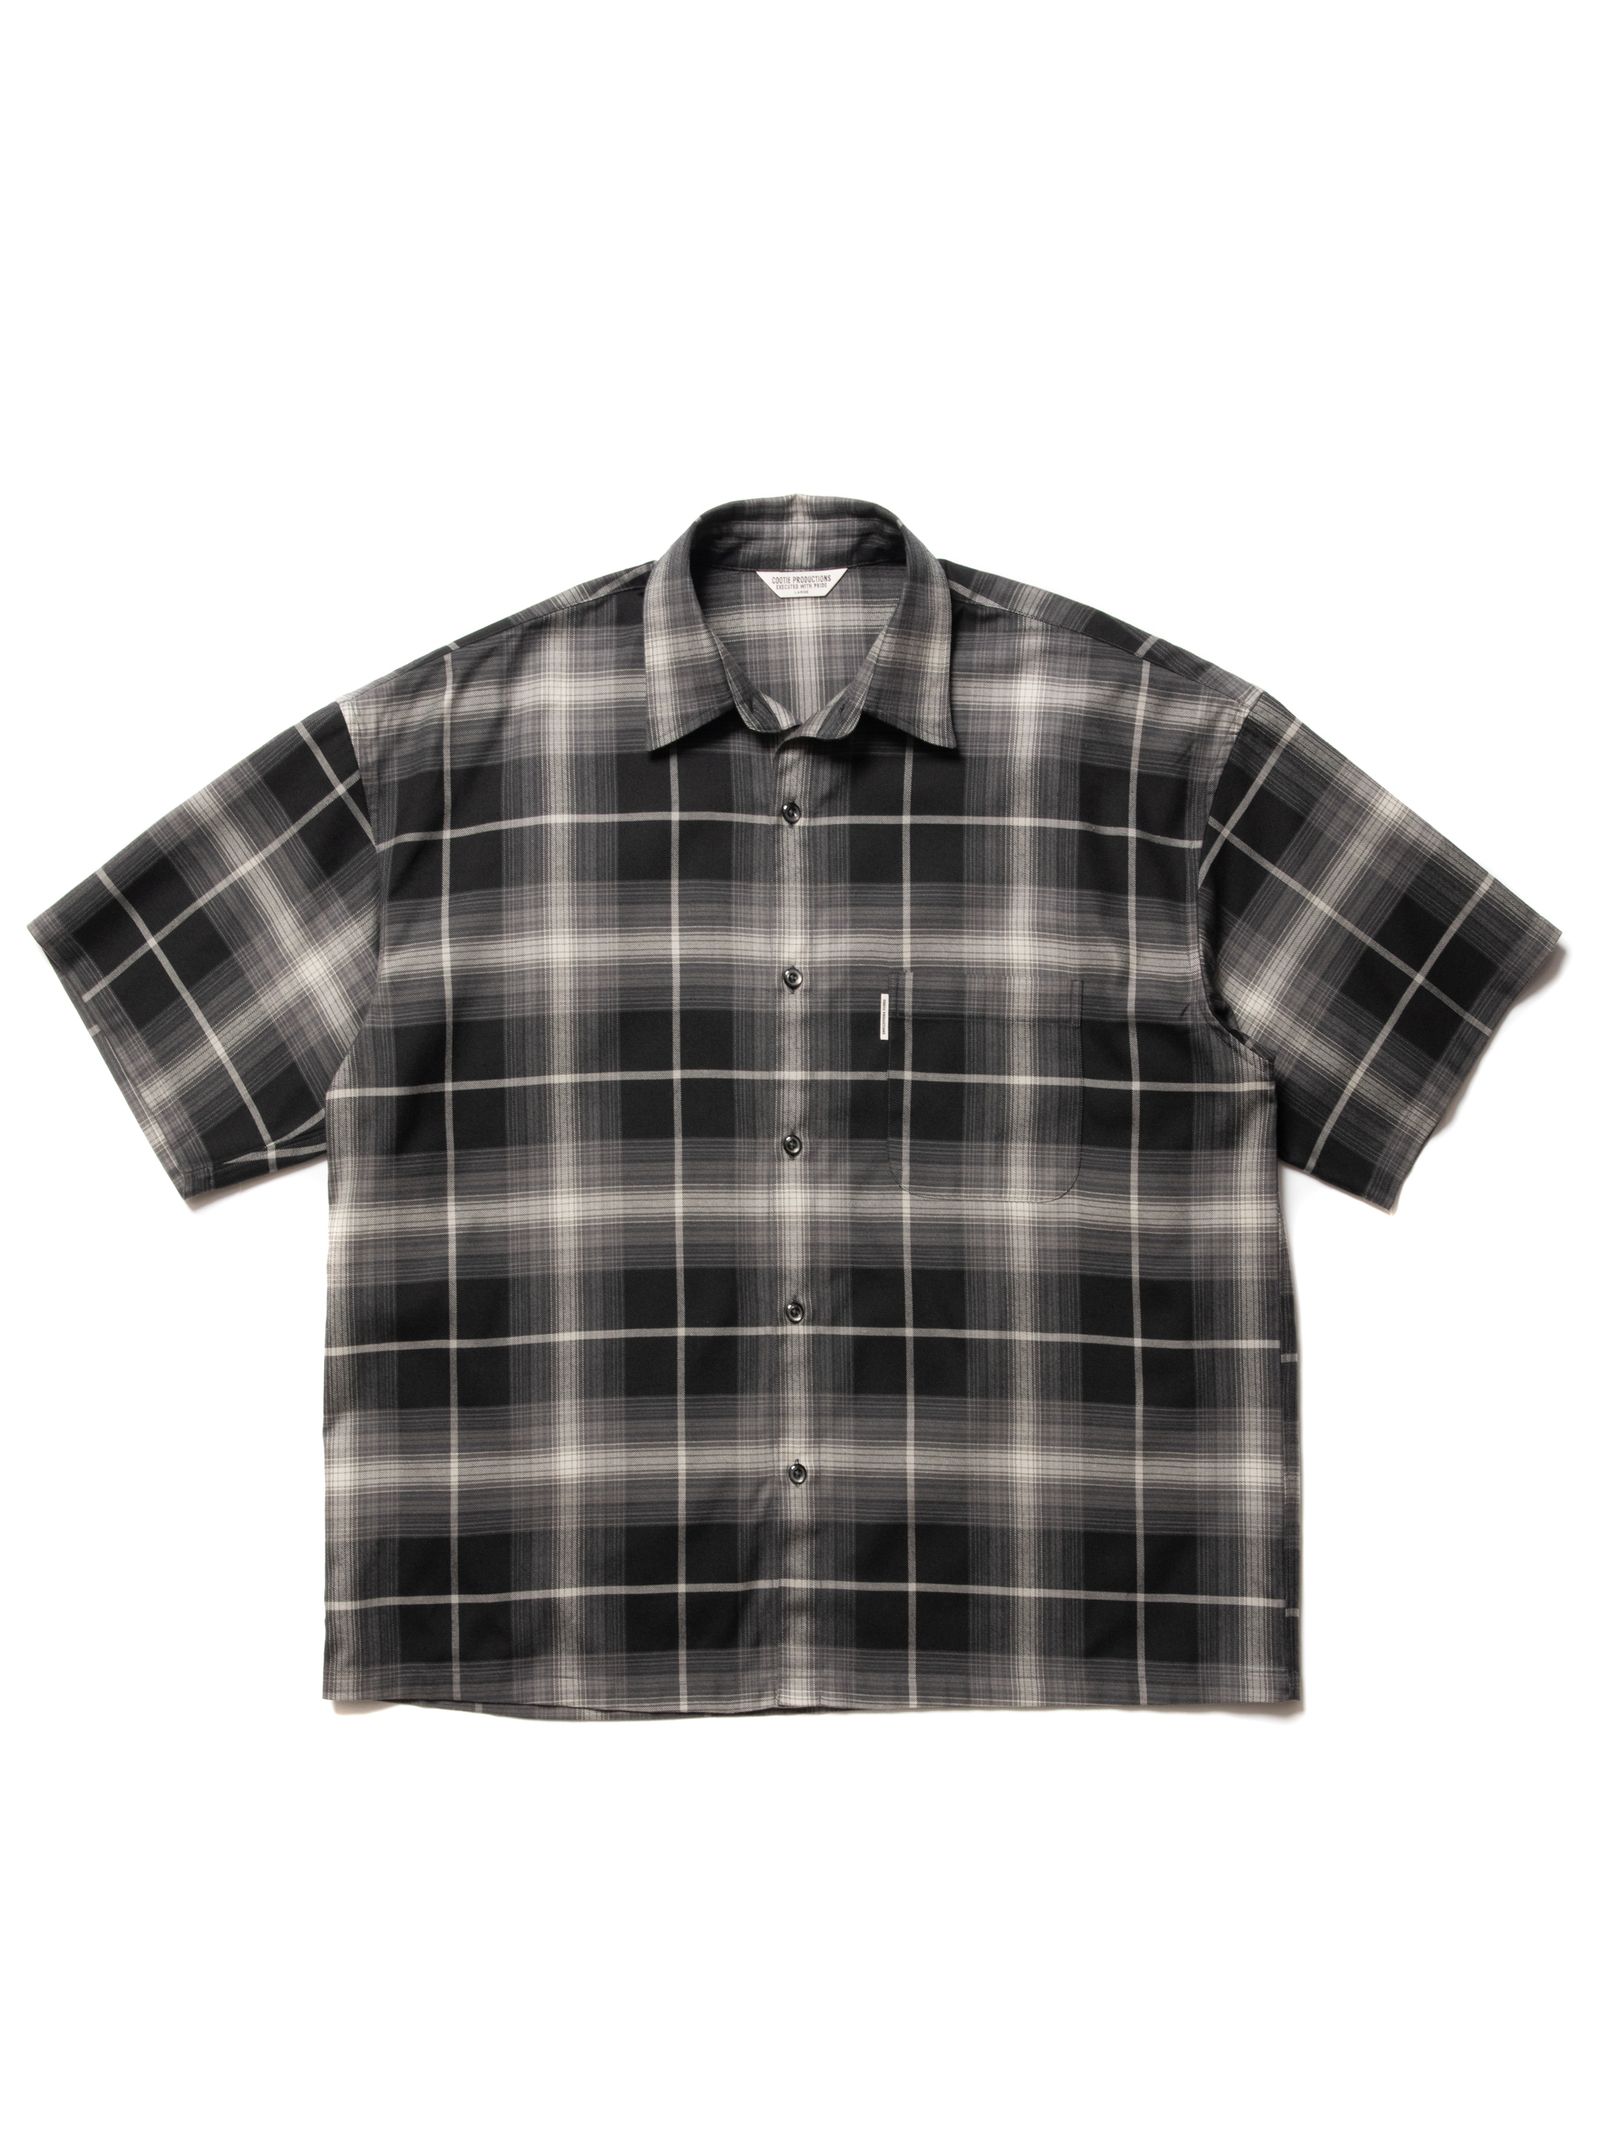 COOTIE PRODUCTIONS - R/C Ombre Check S/S Shirt (BLACK) / オンブレ